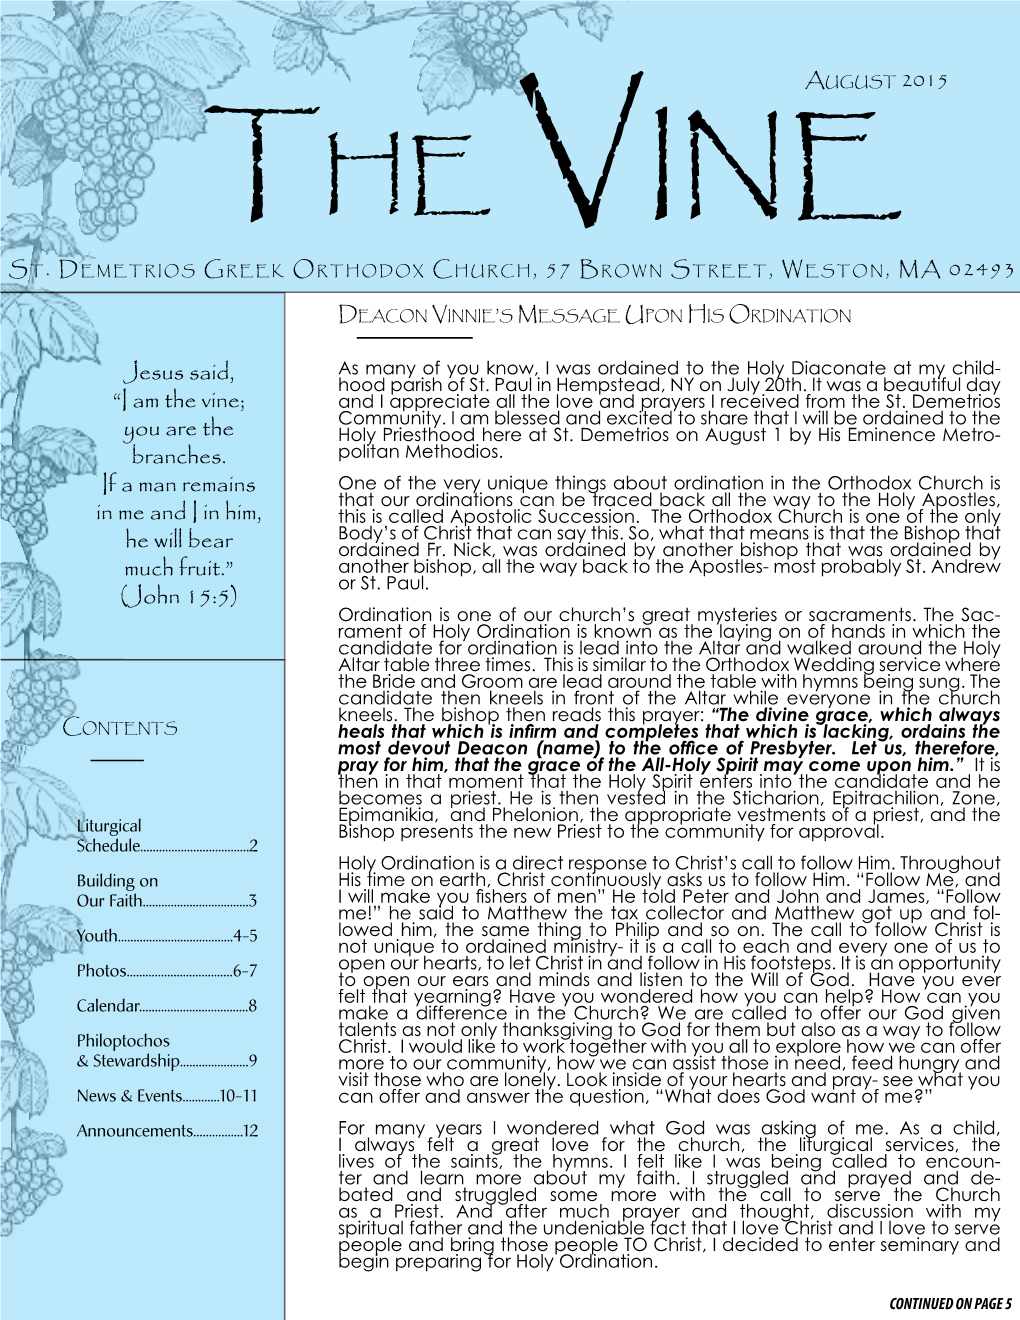 The Vine; and I Appreciate All the Love and Prayers I Received from the St